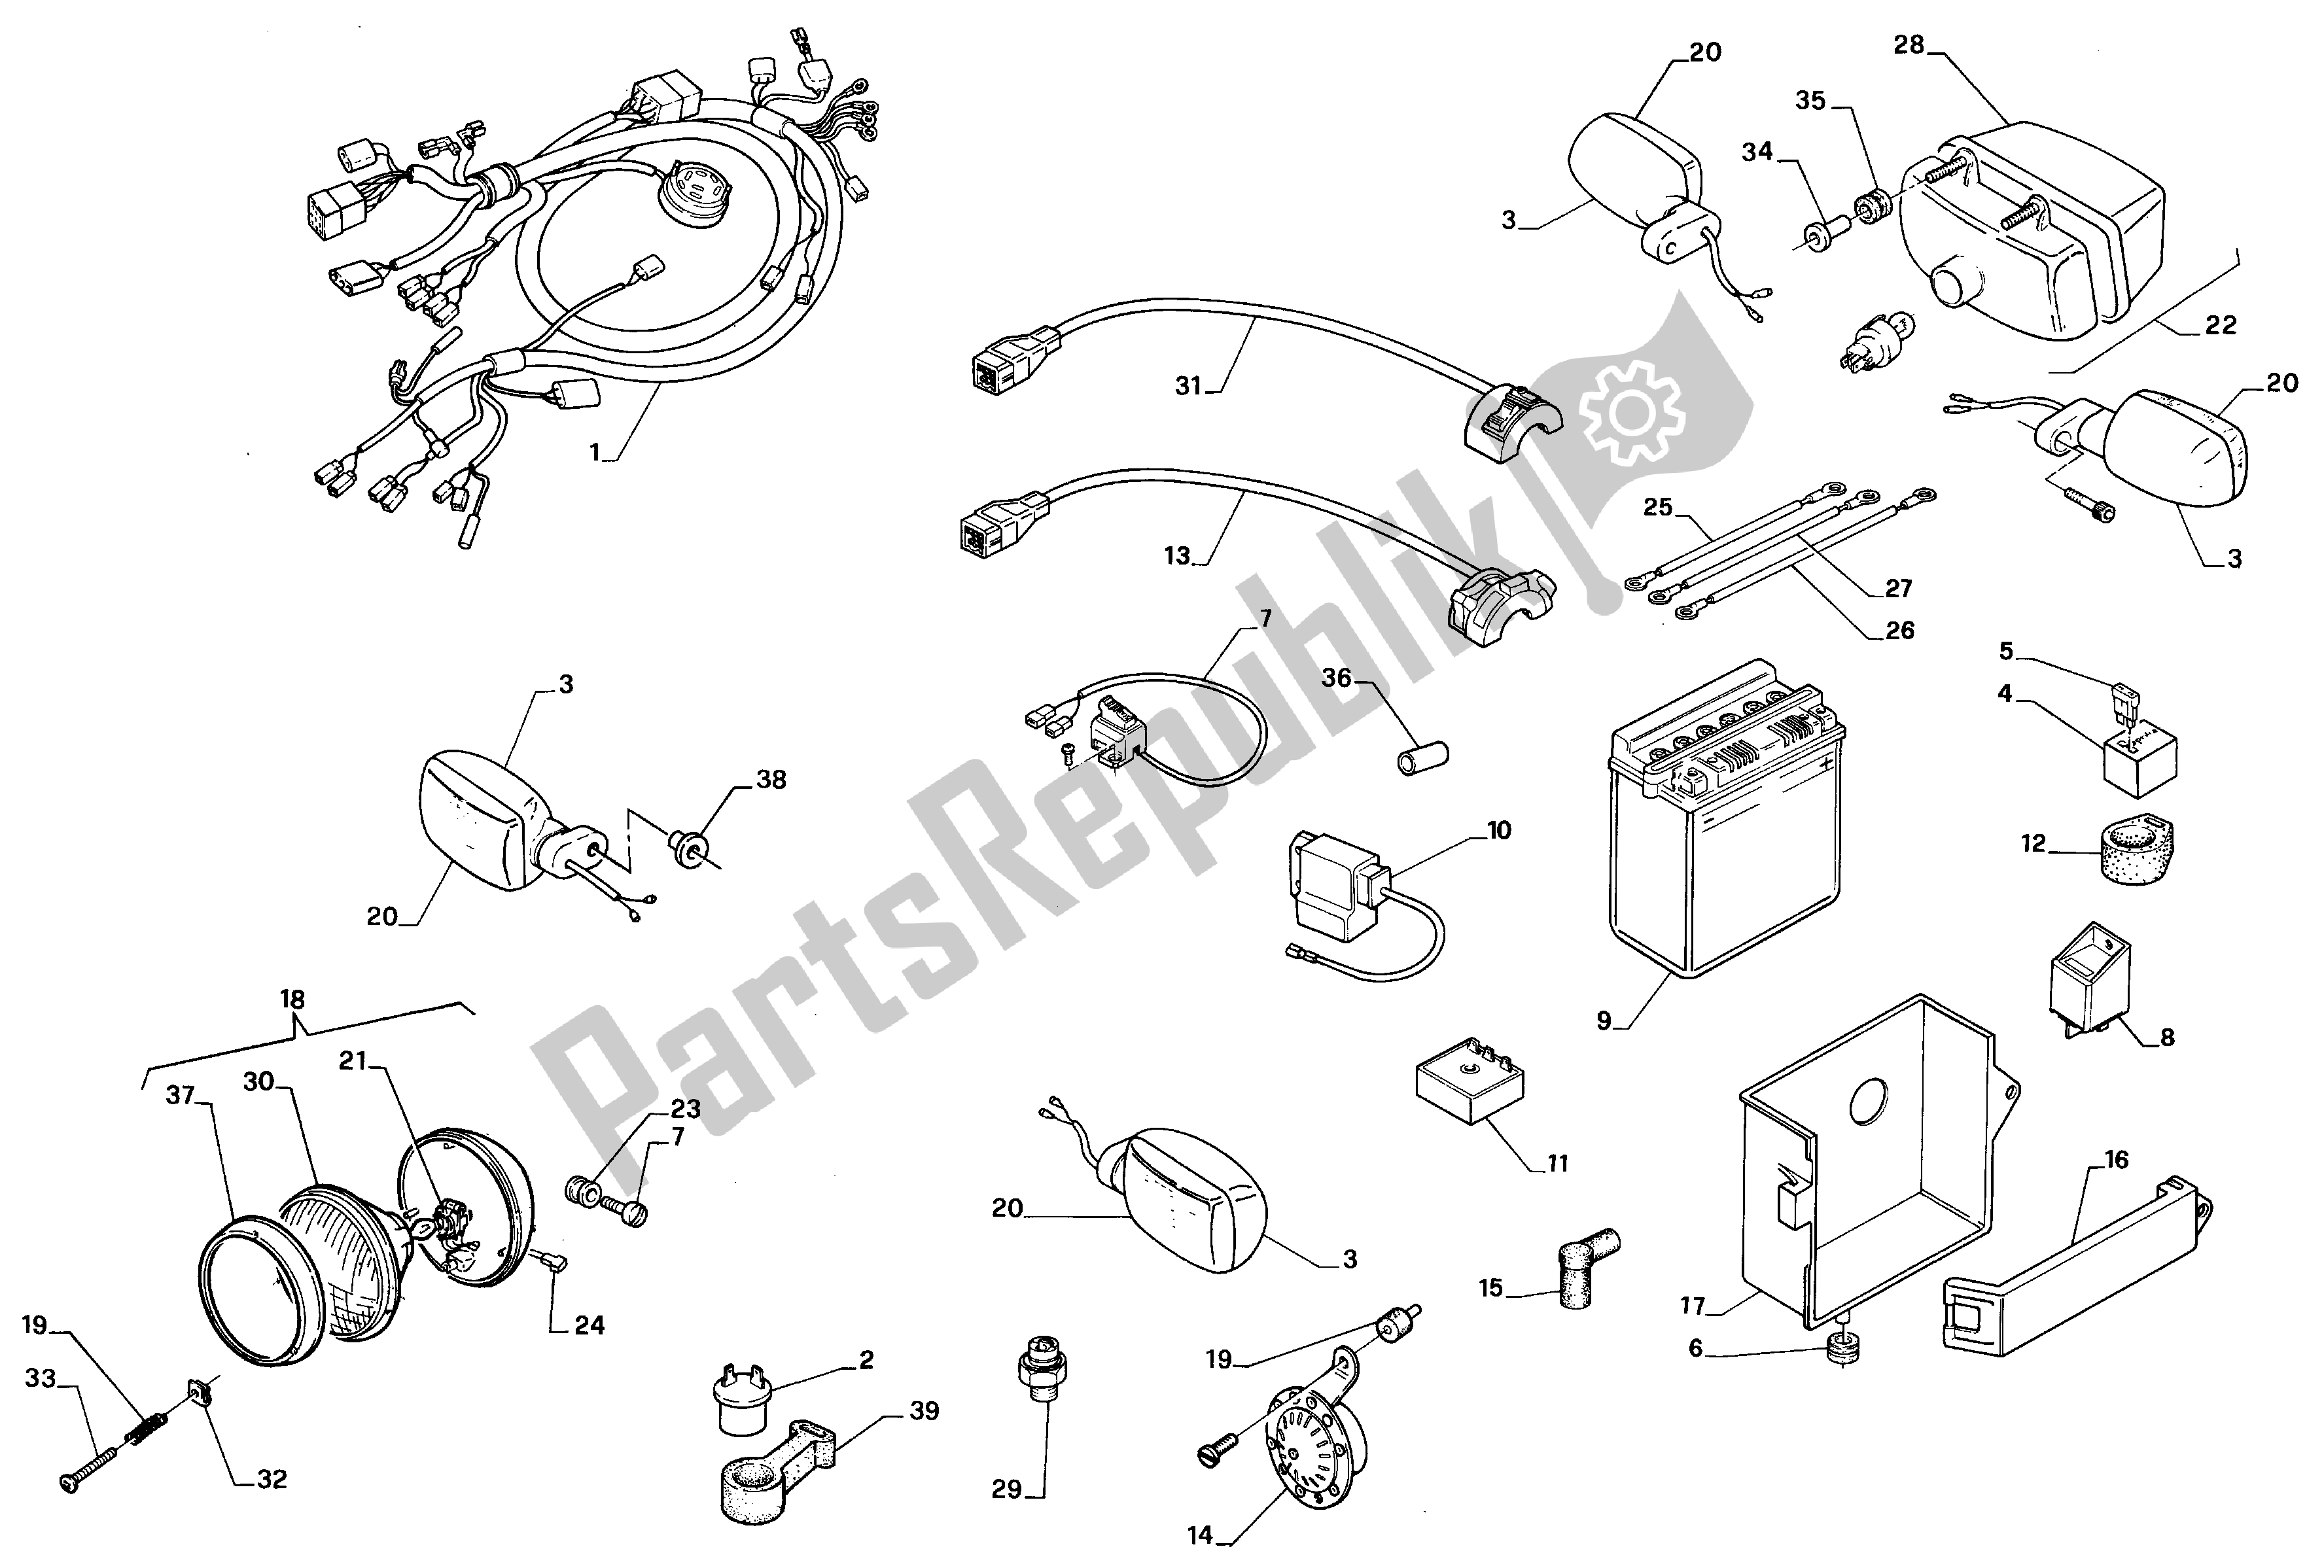 All parts for the Electrical System of the Aprilia AF1 50 1990